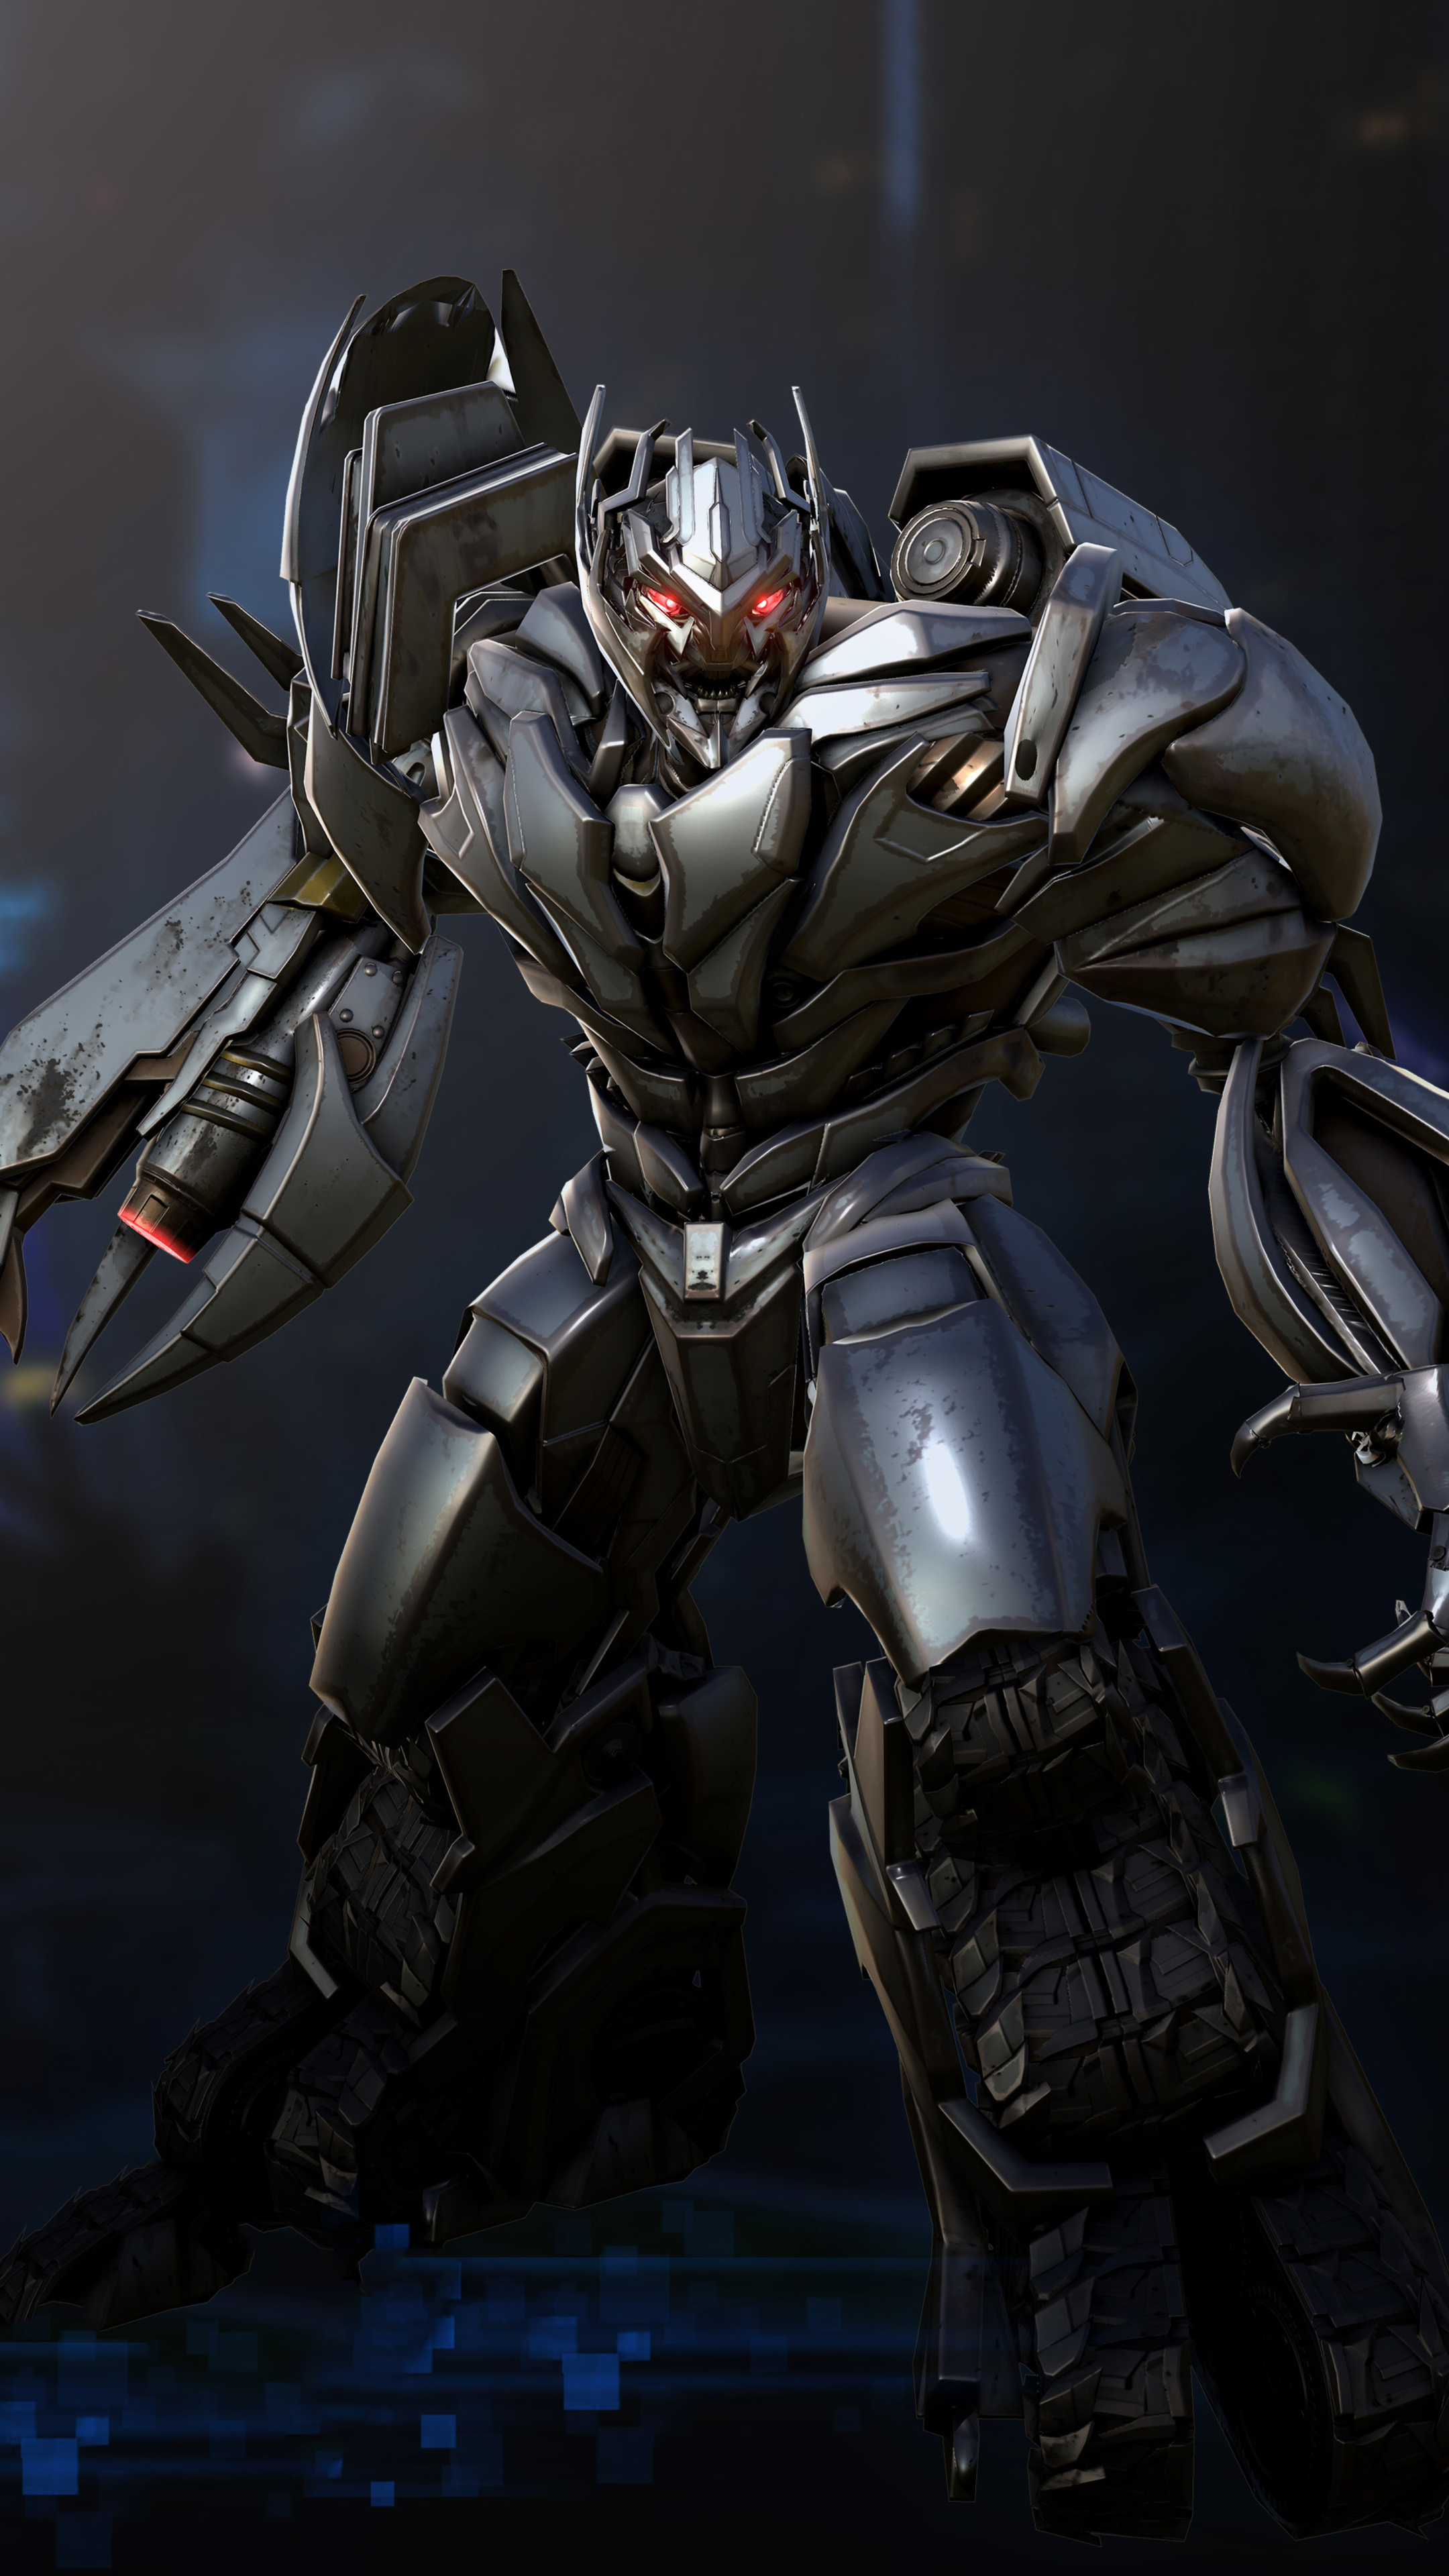 Megatron (Transformers), Forged to Fight, Sony Xperia, Cutting-edge wallpapers, 2160x3840 4K Handy